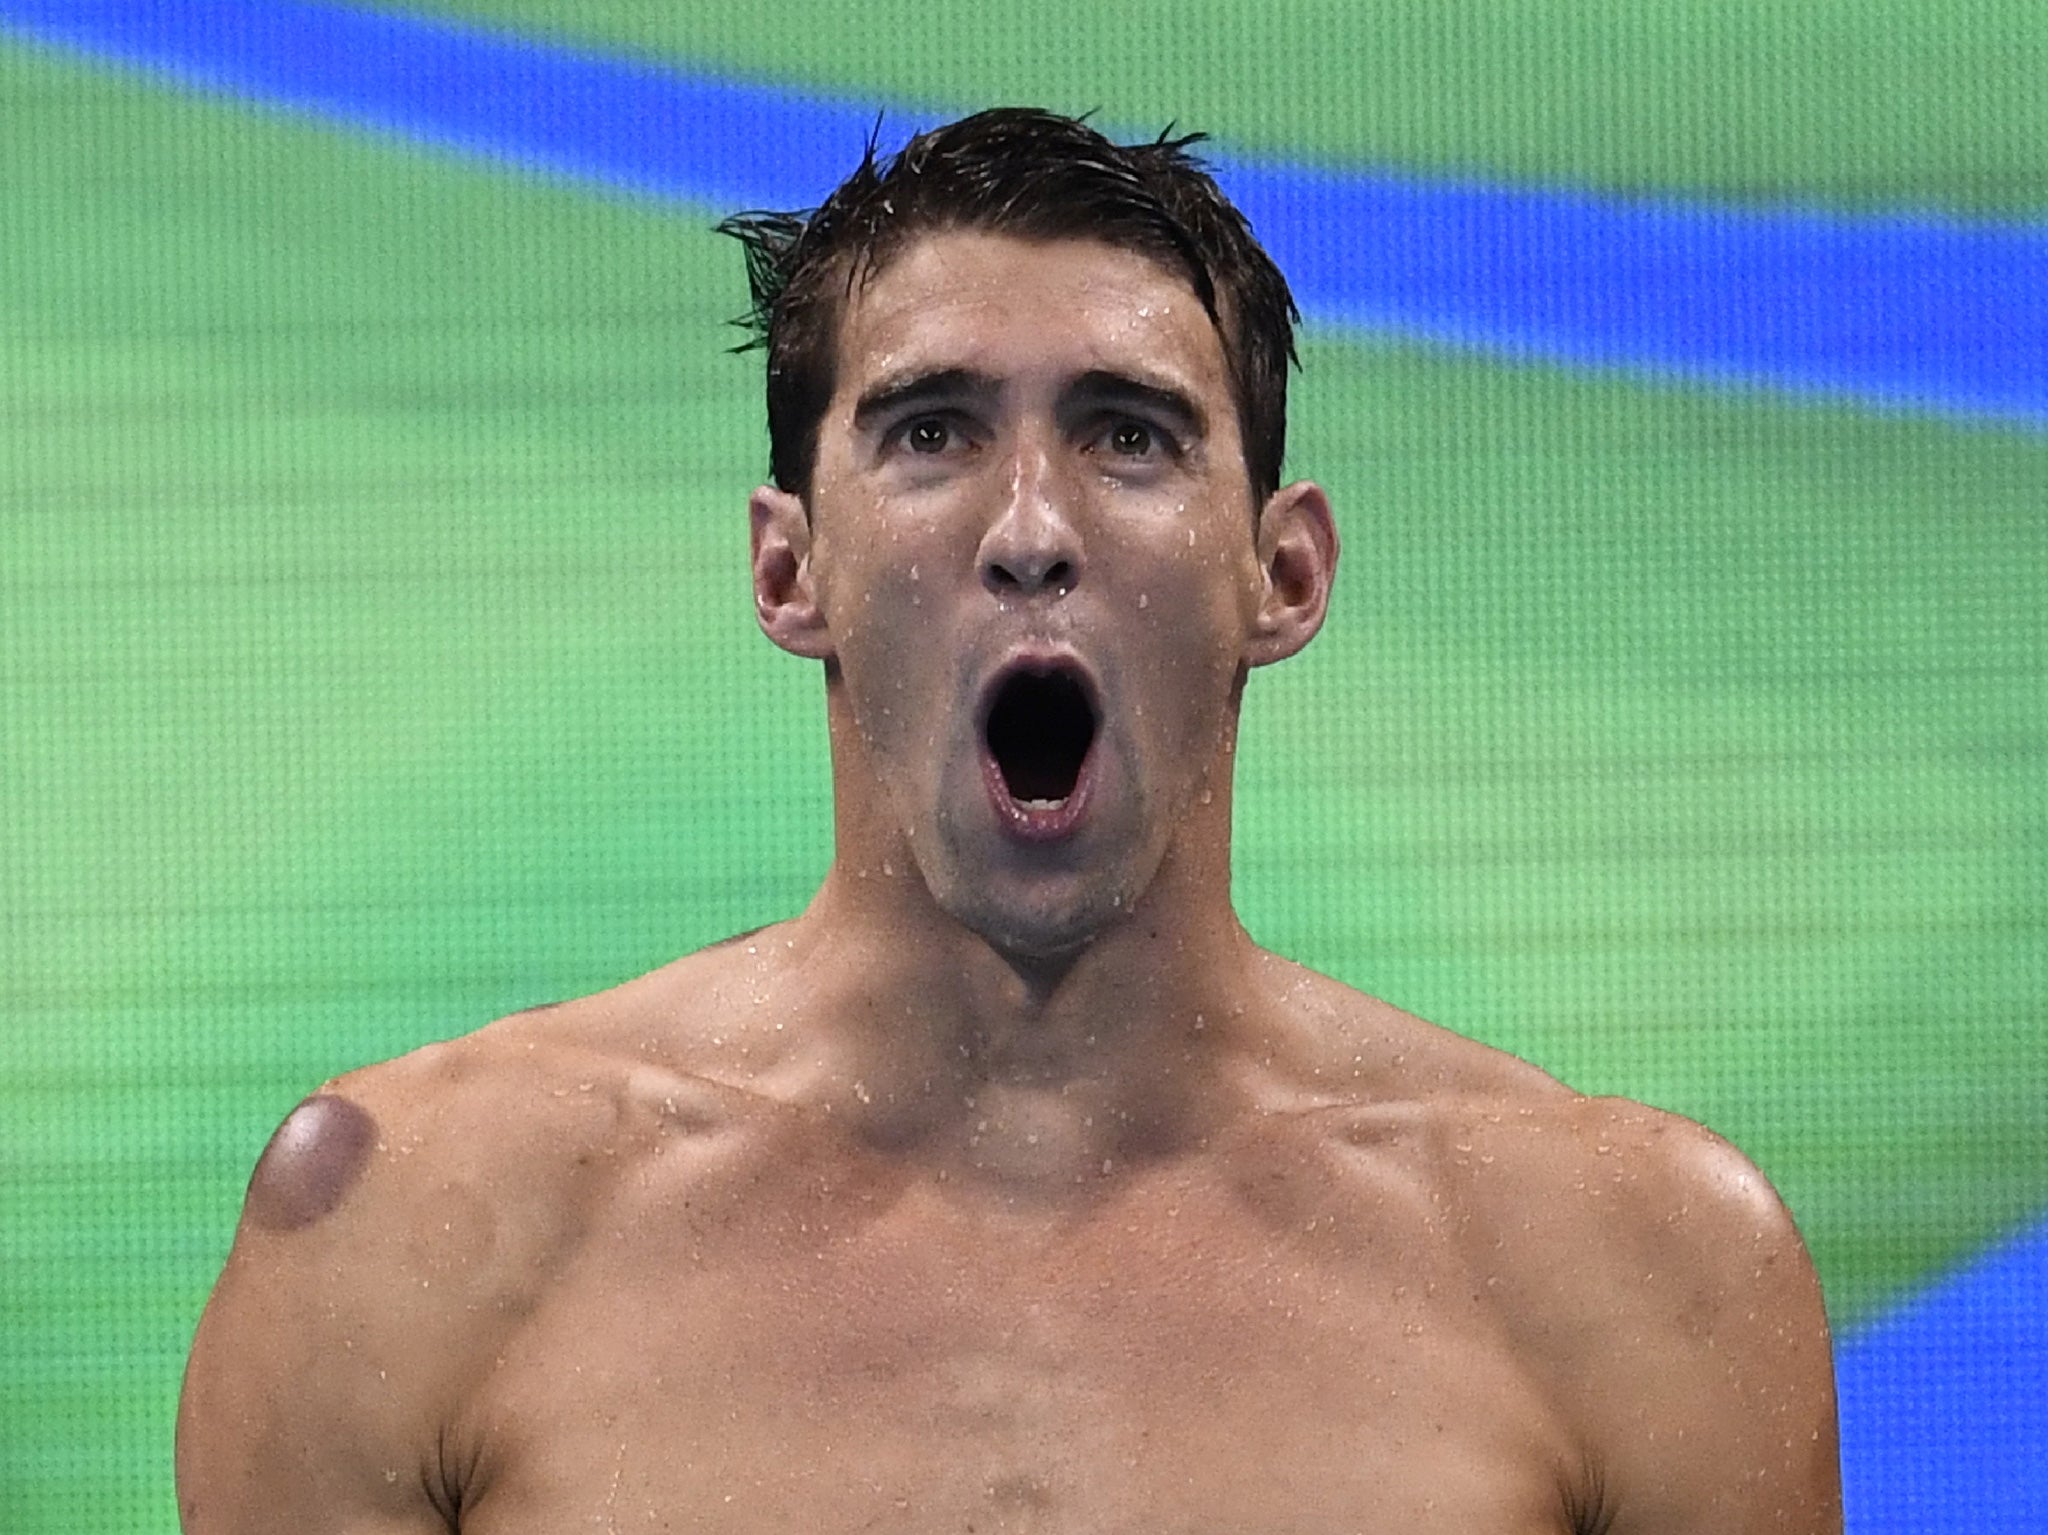 Phelps could not contain his delight after the United States' victory